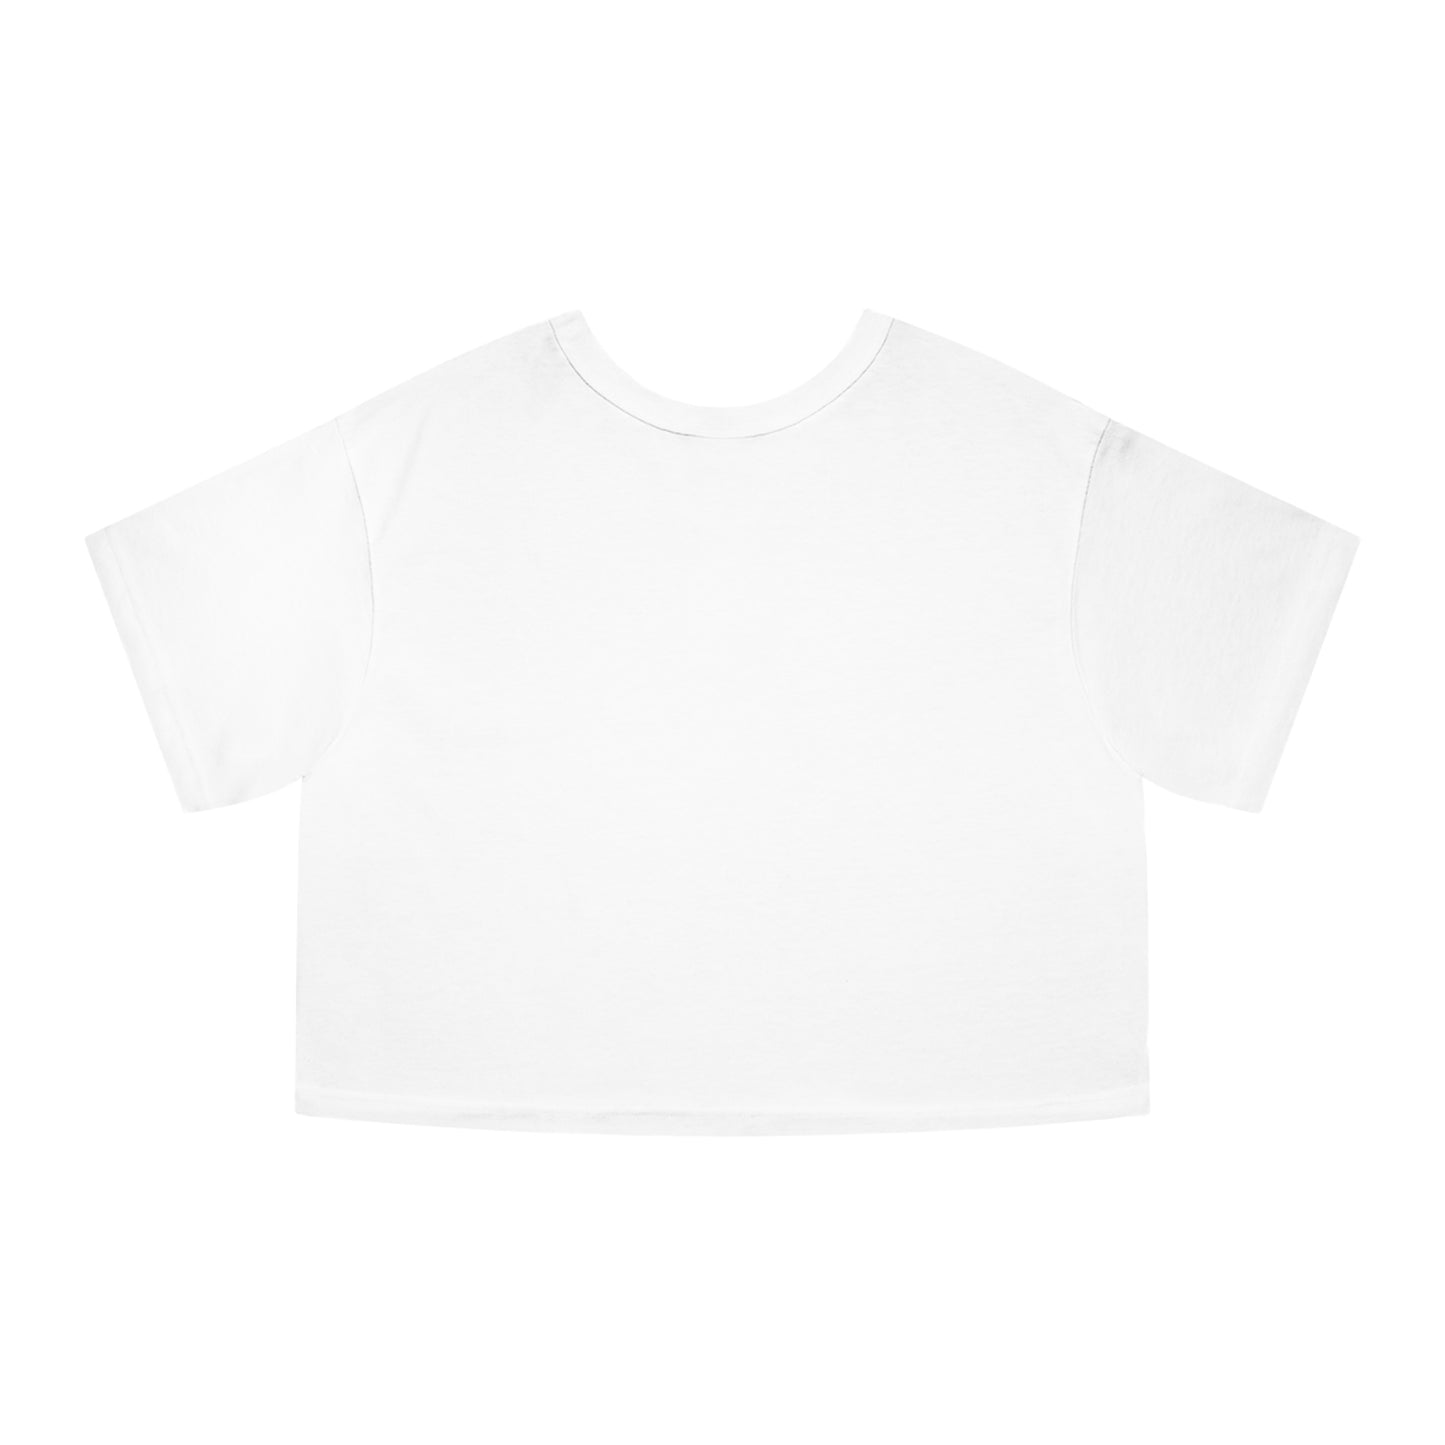 "Lucky you" - Champion crop top